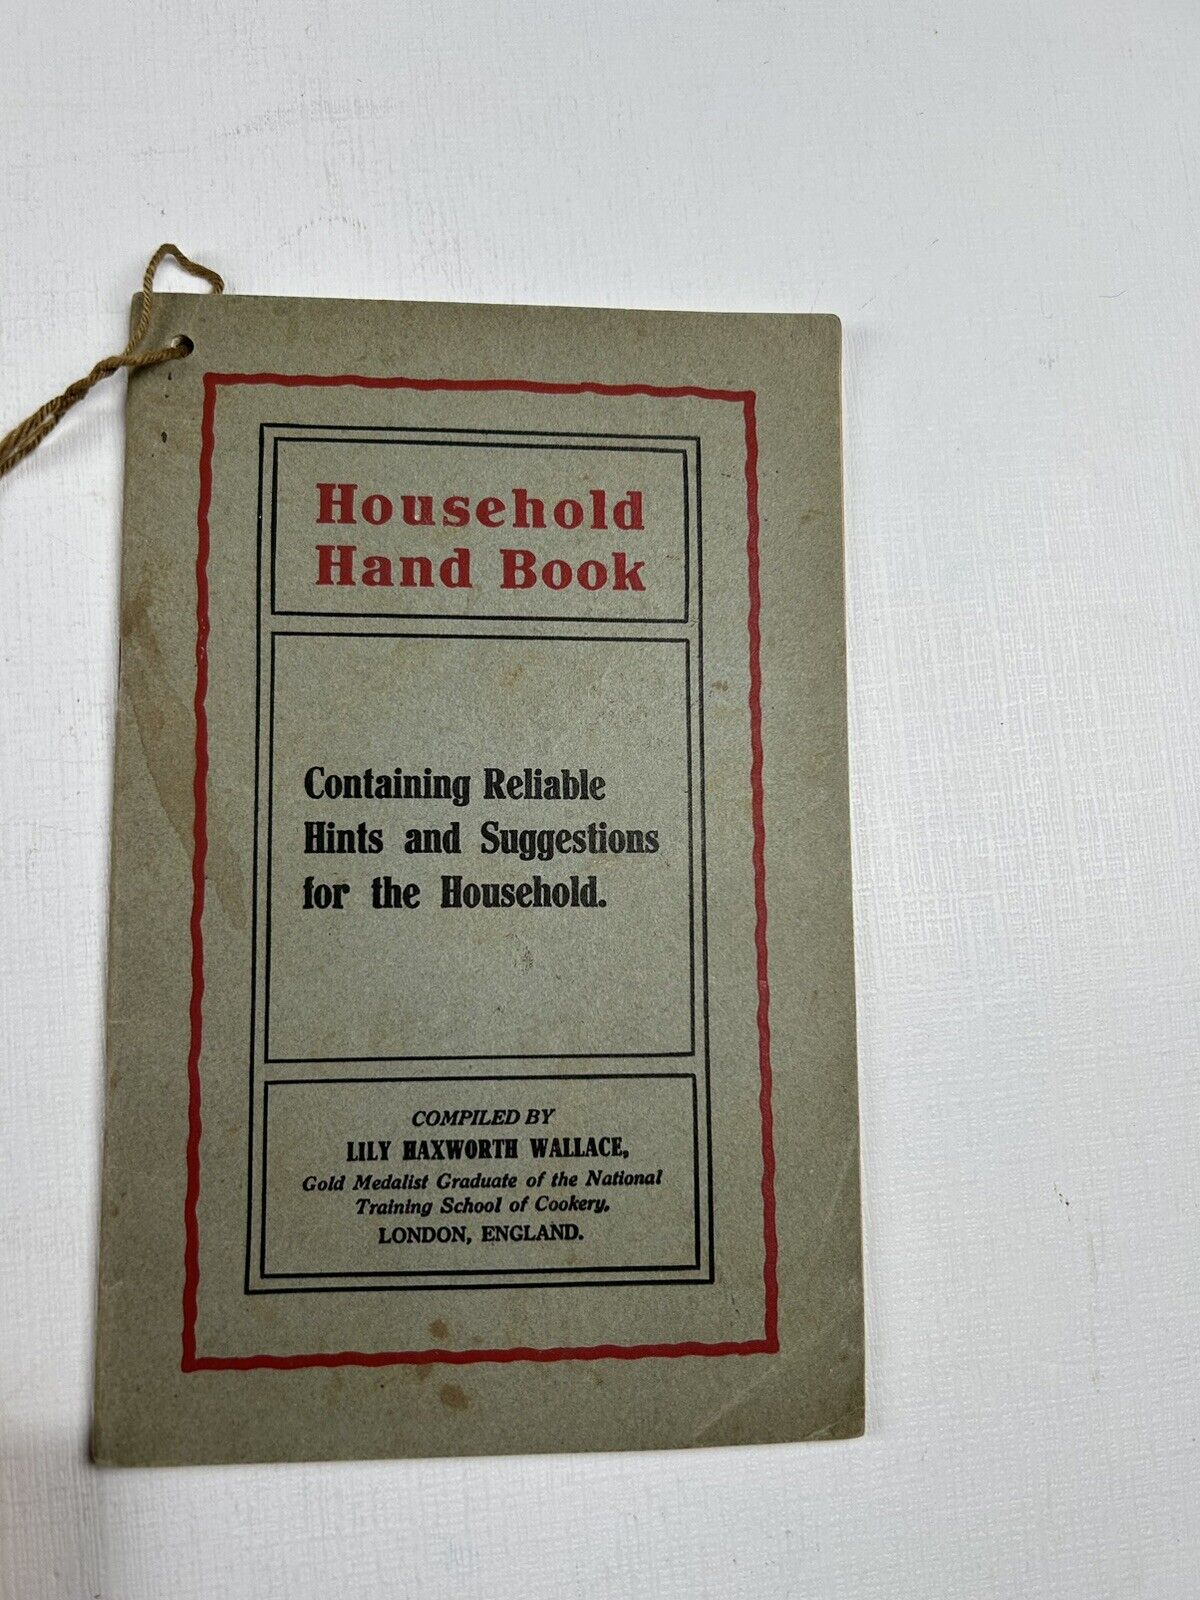 Household Handbook Rumford Chemical Works Lilly Wallace